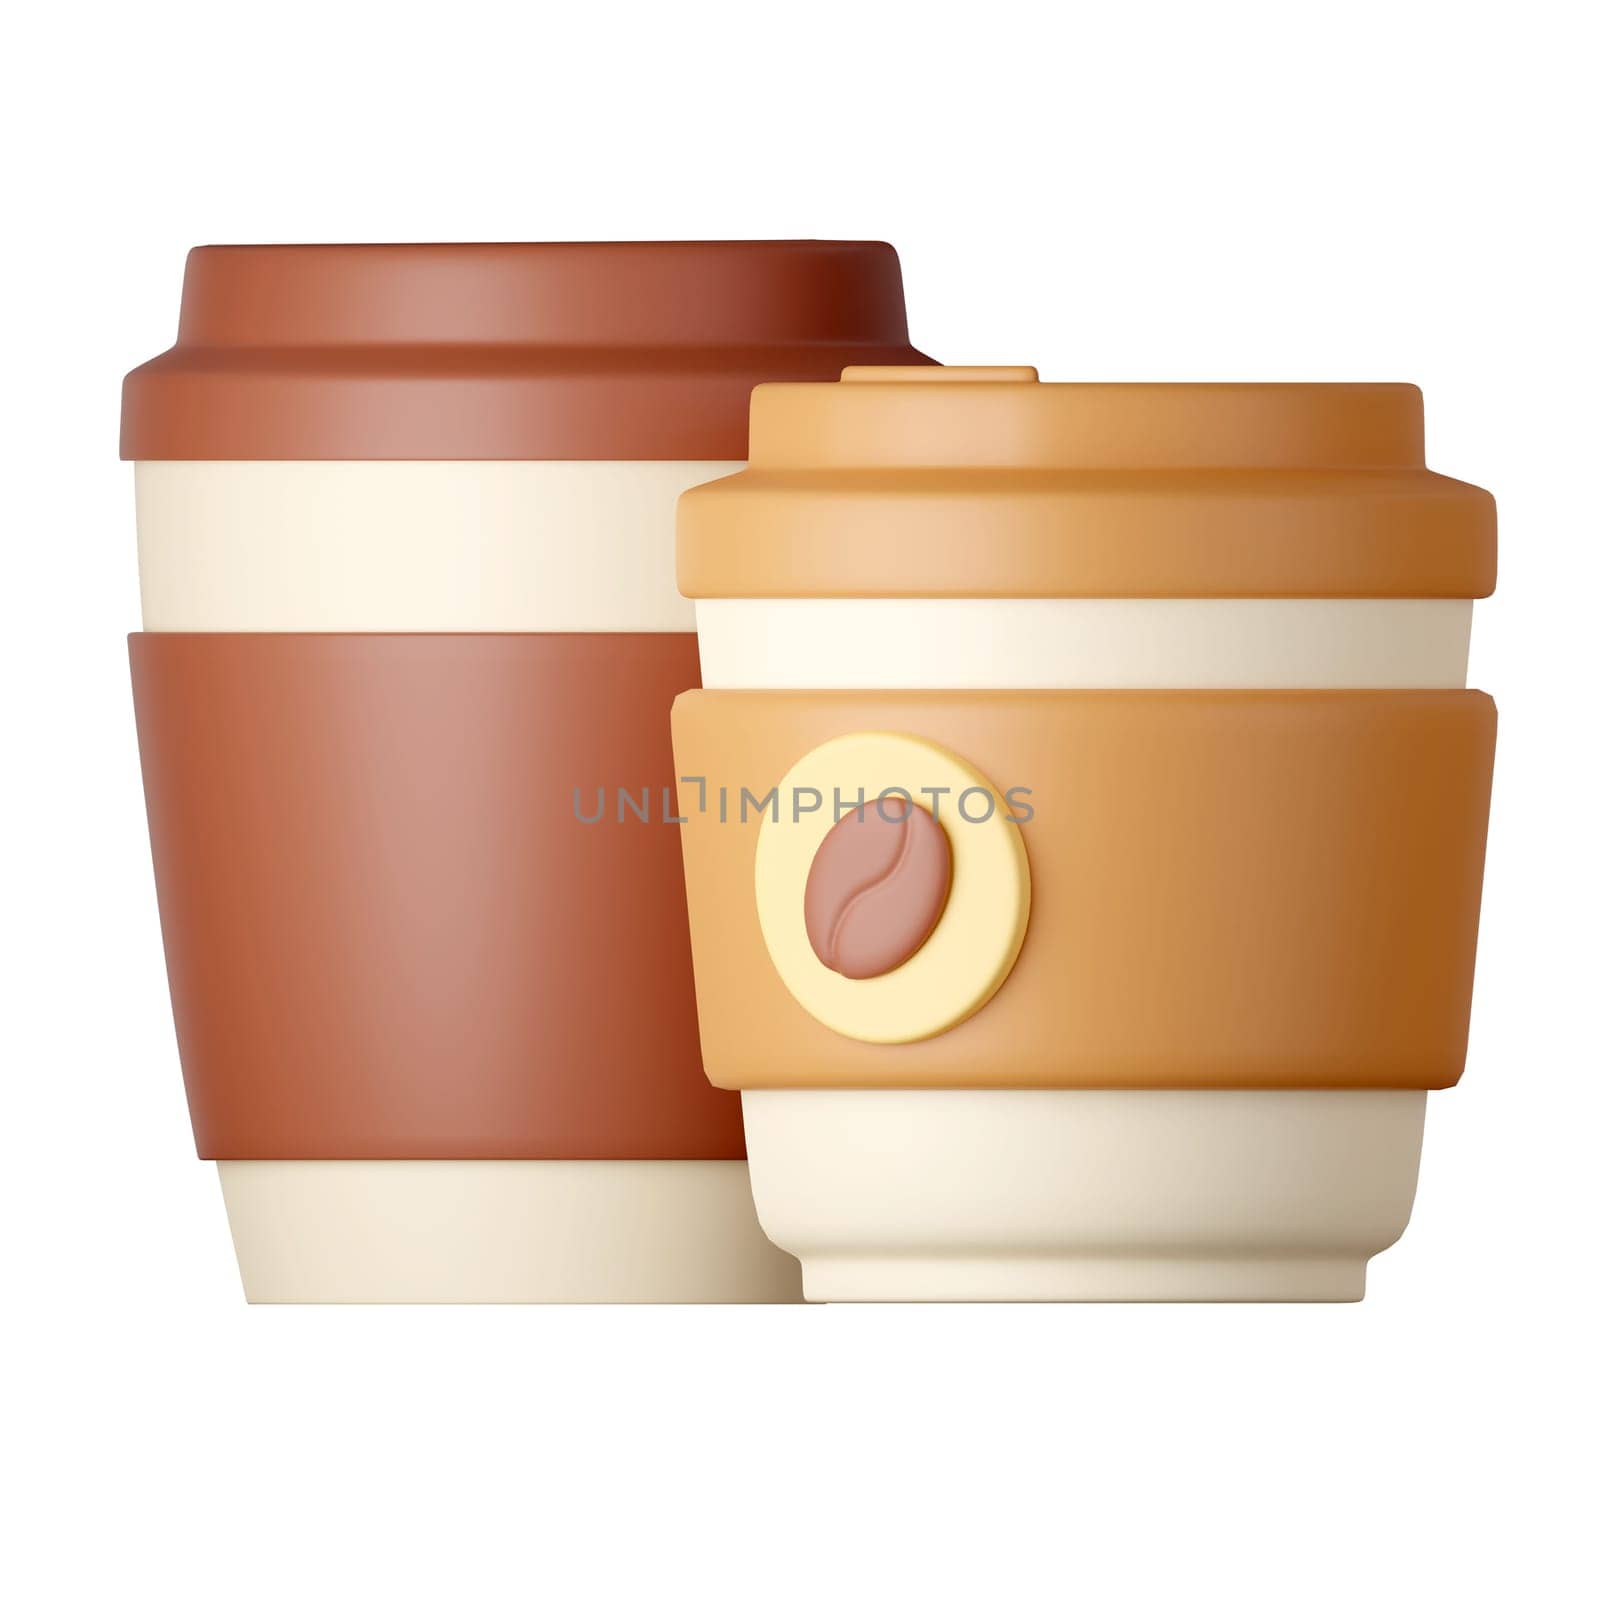 a coffee mug Cartoon Style Isolated on a White Background. 3d illustration by meepiangraphic